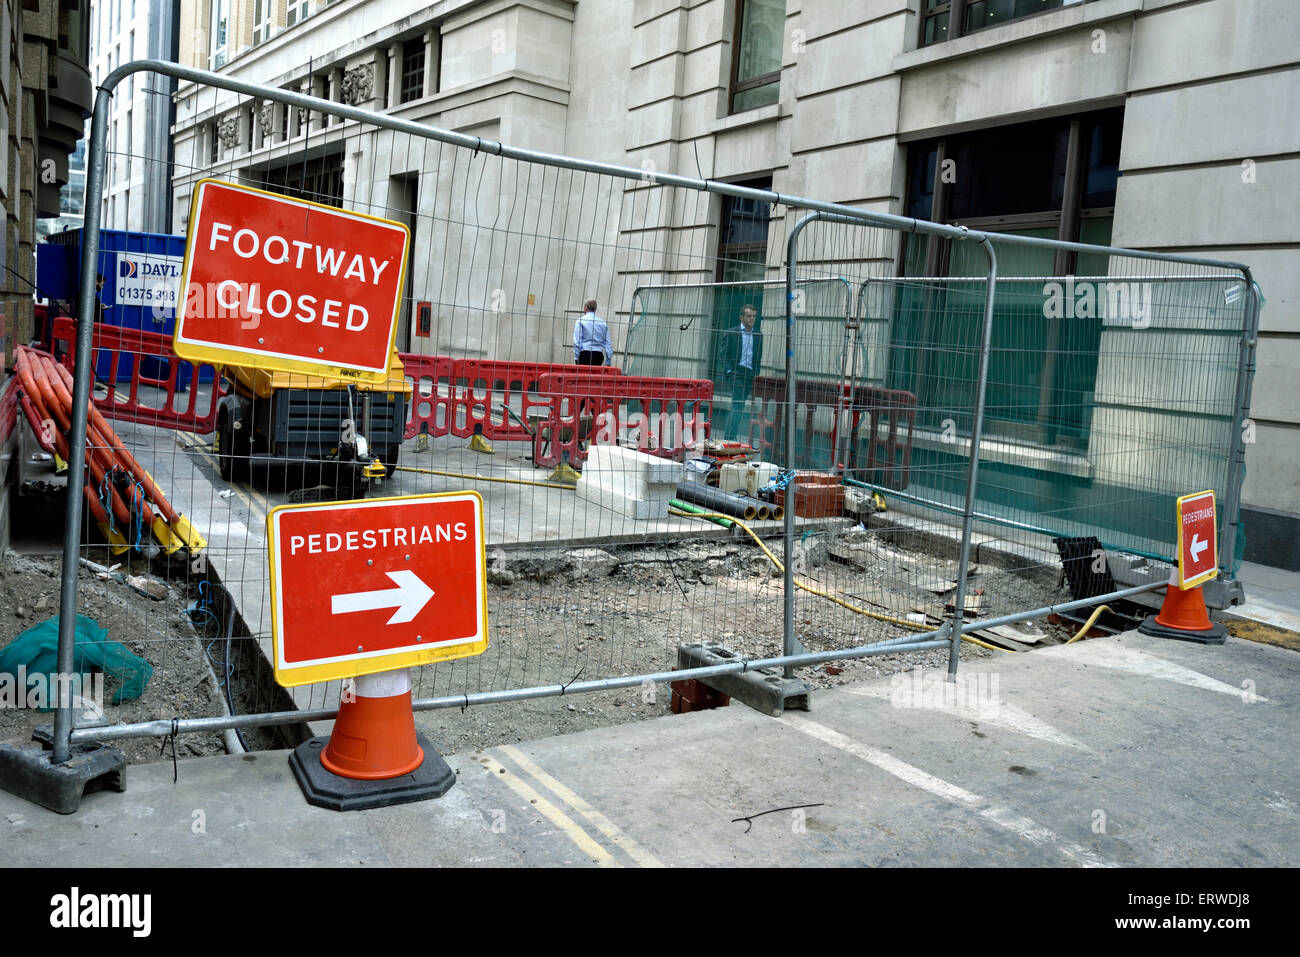 Footway closed sign with arrowed sign redirecting pedestrians around road works, City of London, England Britain UK Stock Photo